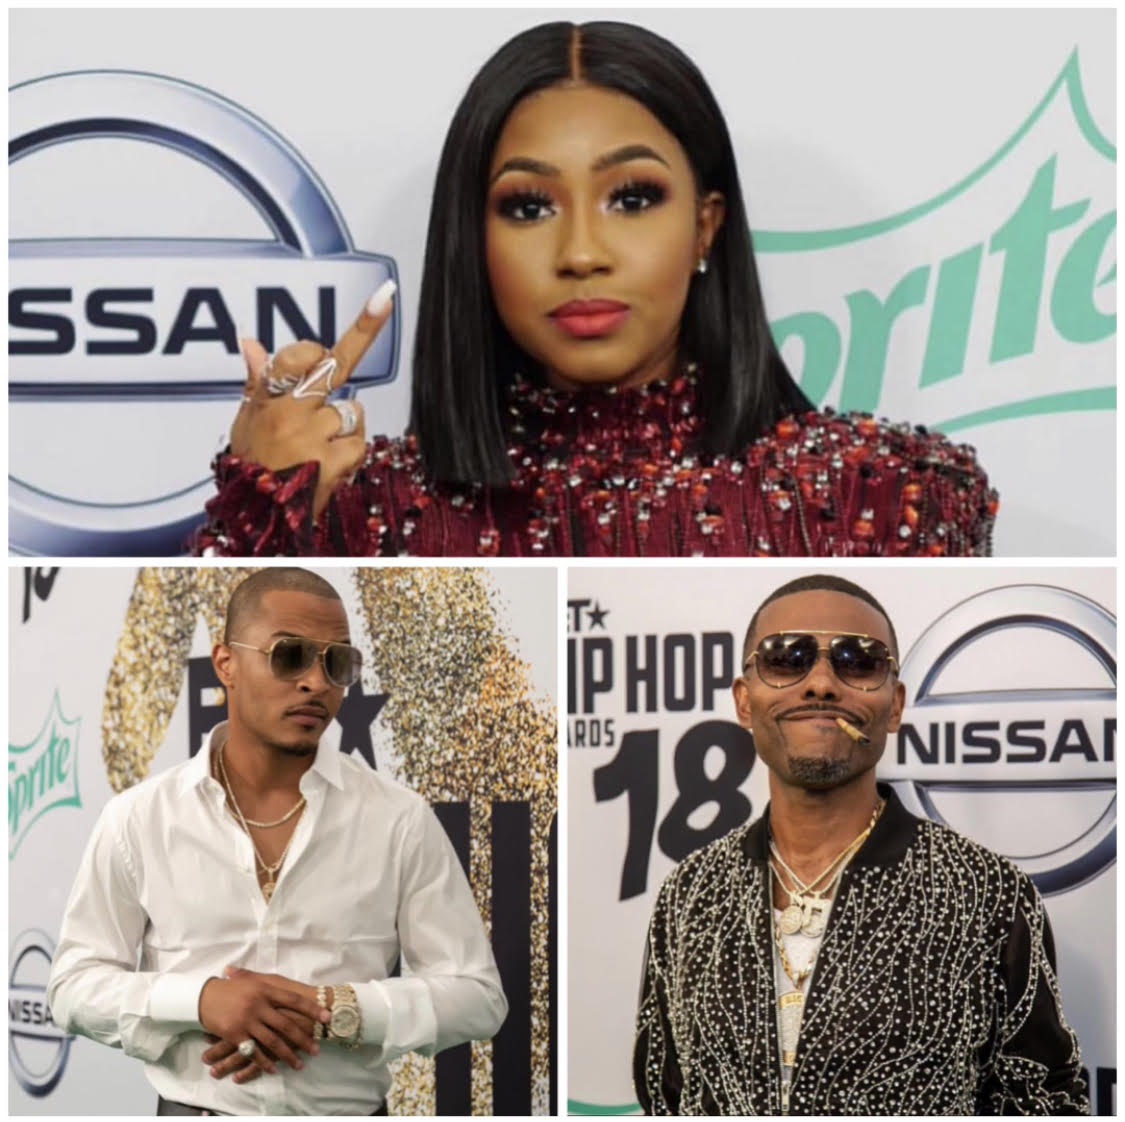 Exclusive #HHUCIT Coverage From the 2018 BET Hip Hop Awards [VIDEO]